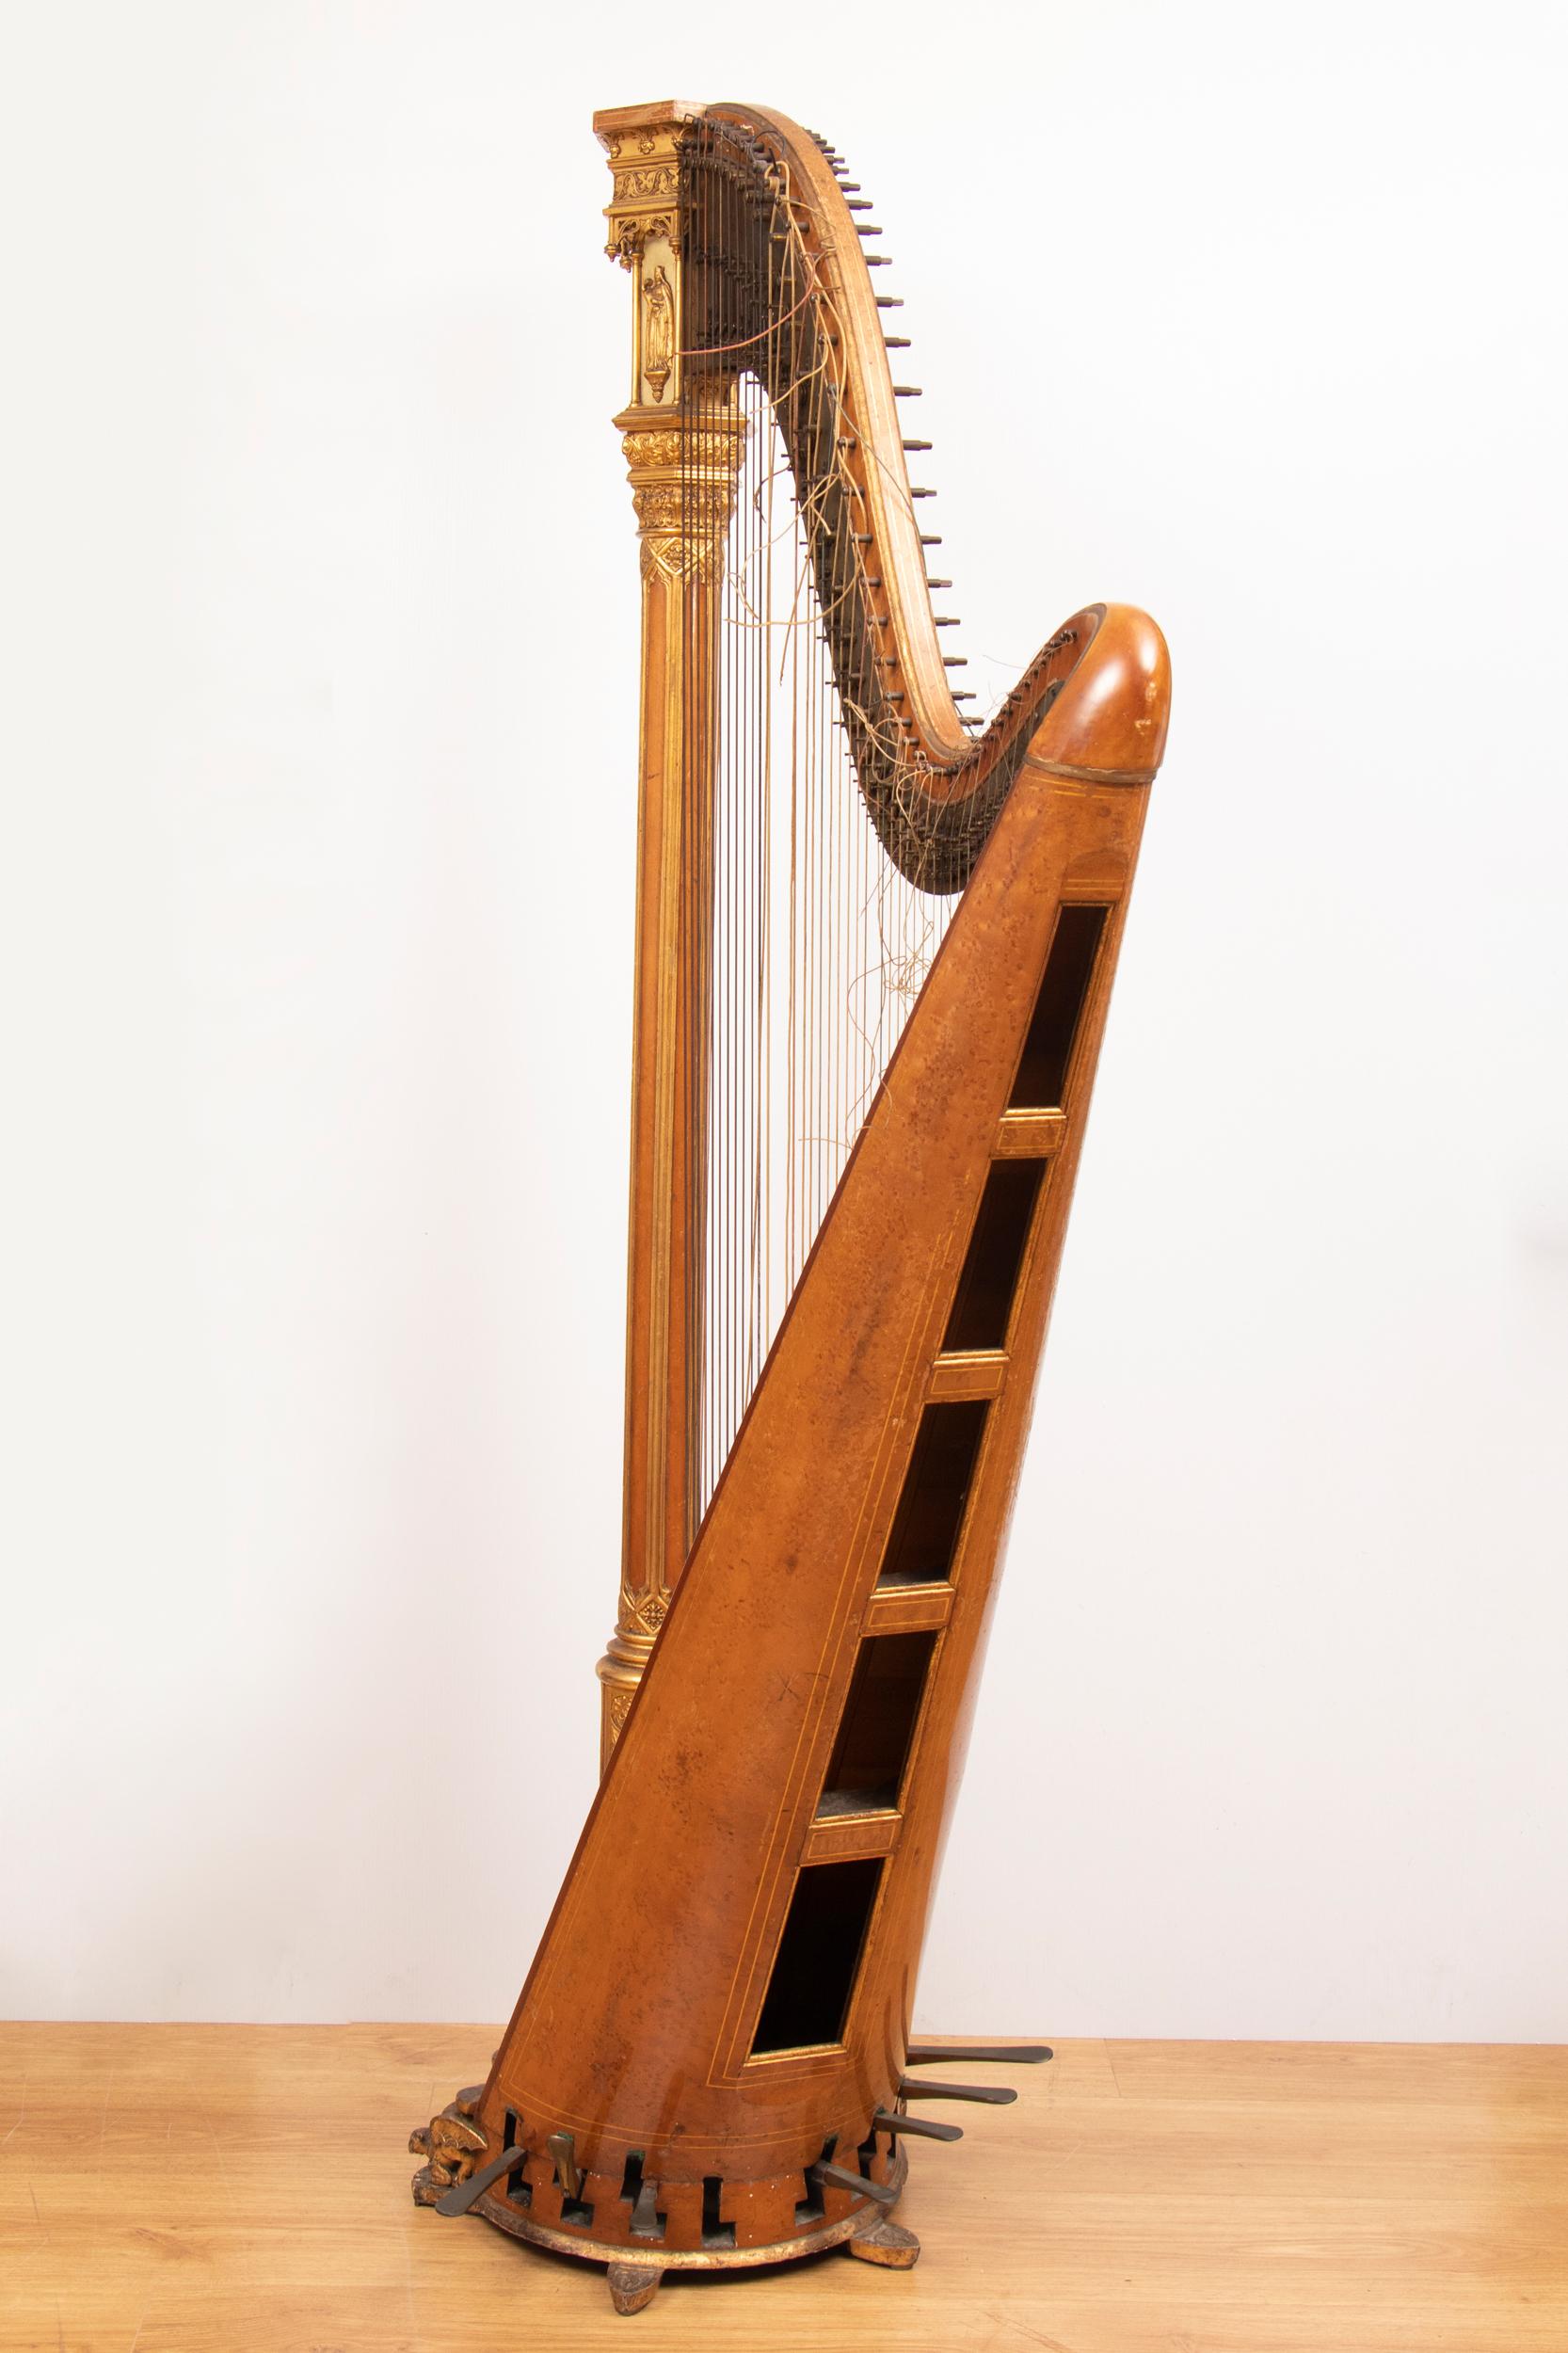 Harp by Sébastien Érard. Intricate gothic detail with winged beasts to the base and religious figures at the top. Played until 20 years ago, it has remained in the same family for many years. It would need restoration to be played again but is an